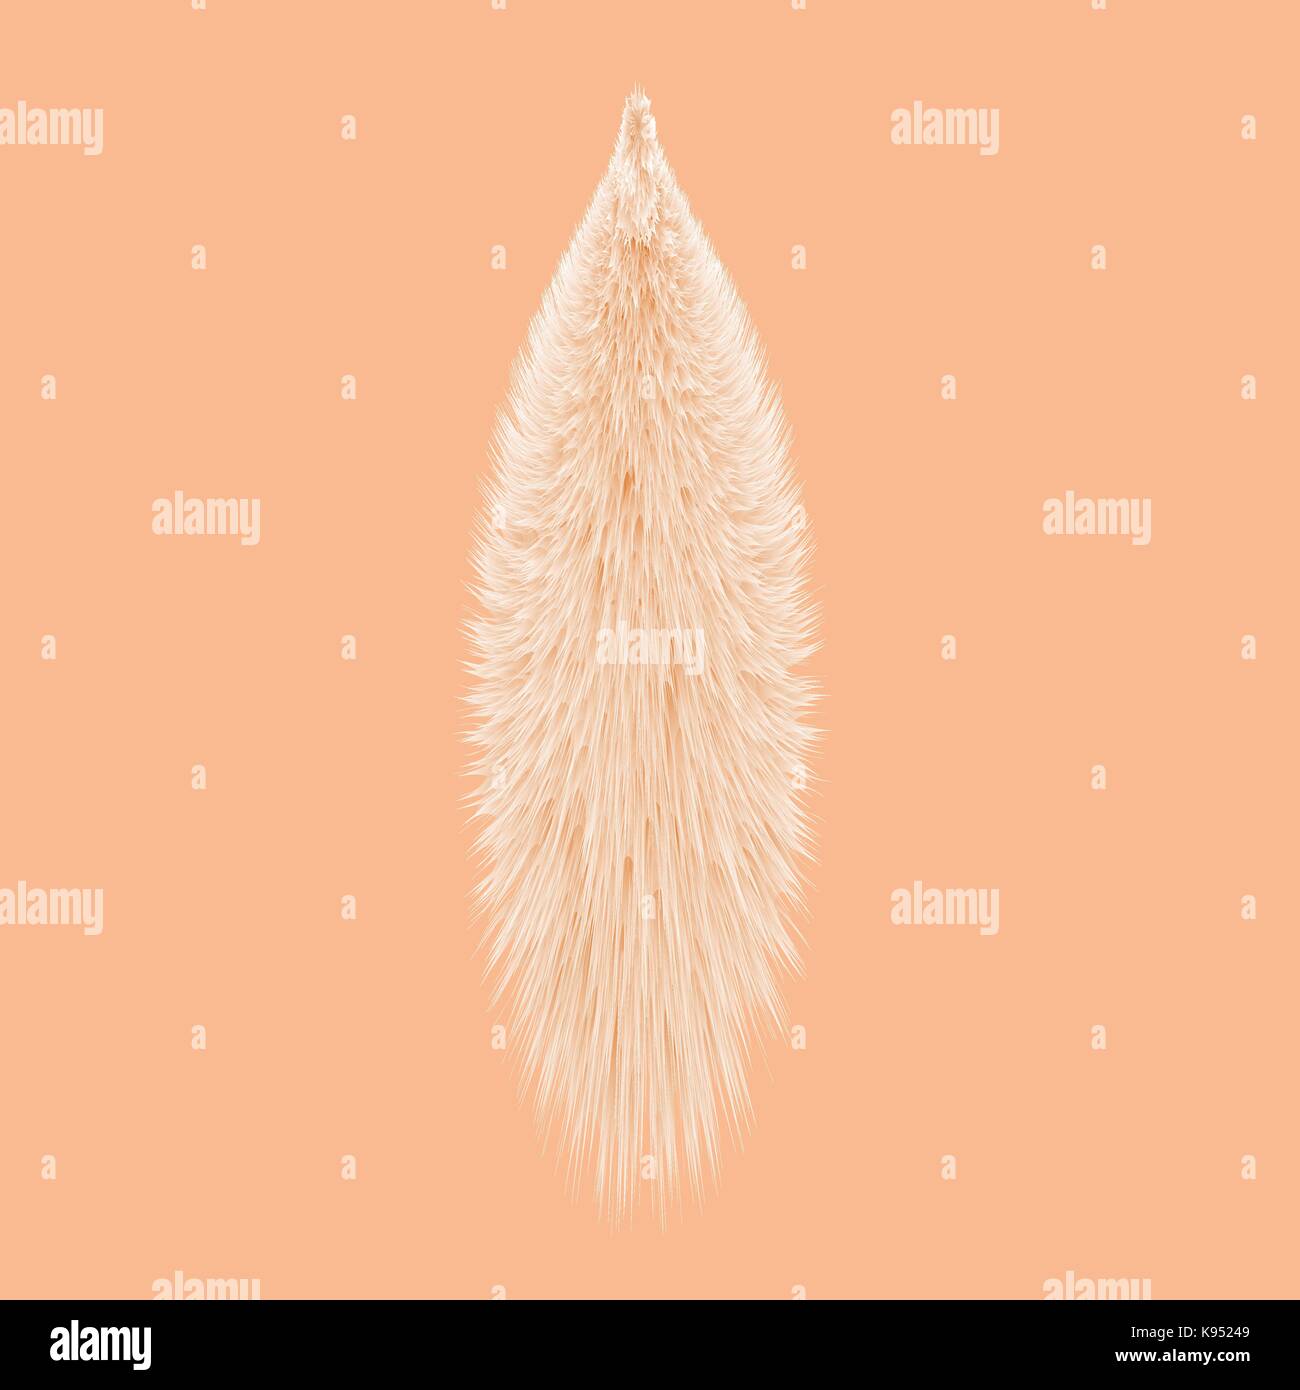 Animal Fur Tail Isolated on Orange Background Stock Vector